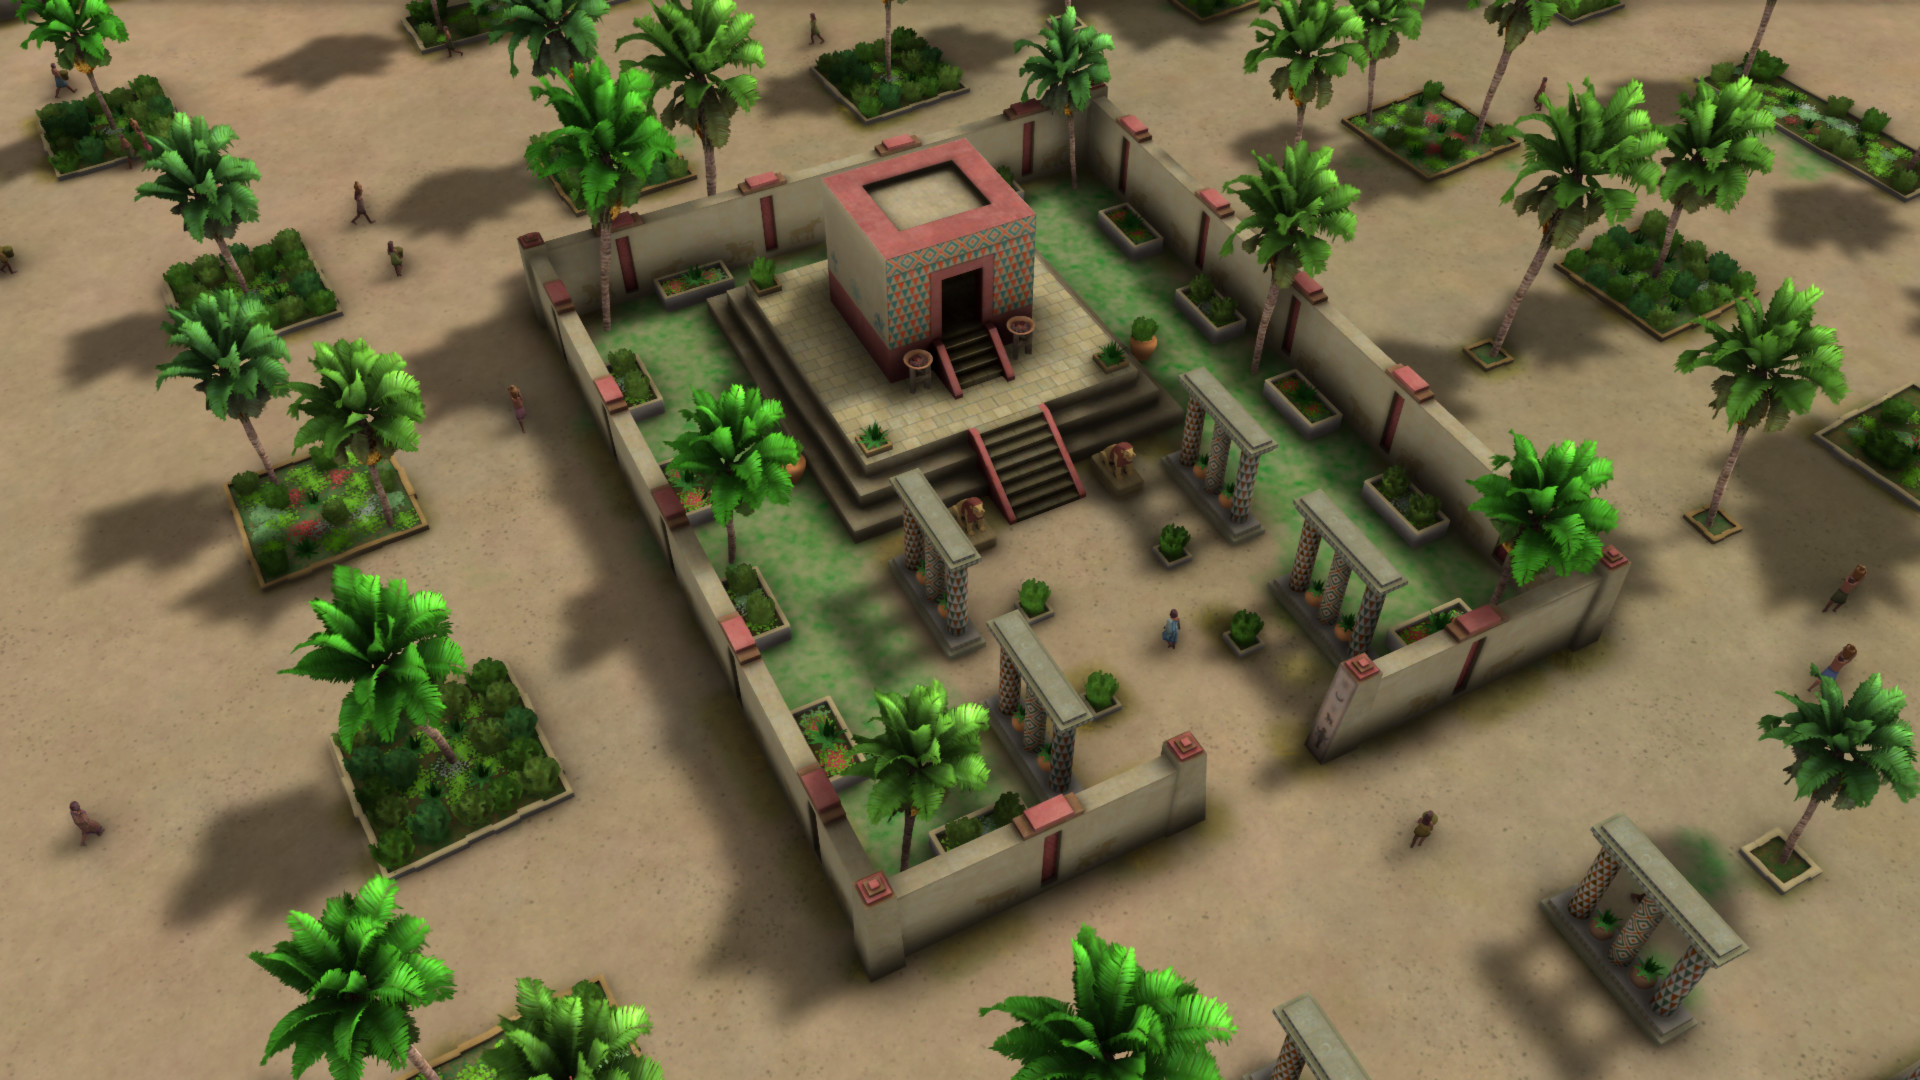 An image of an ancient city from the game Sumerians.